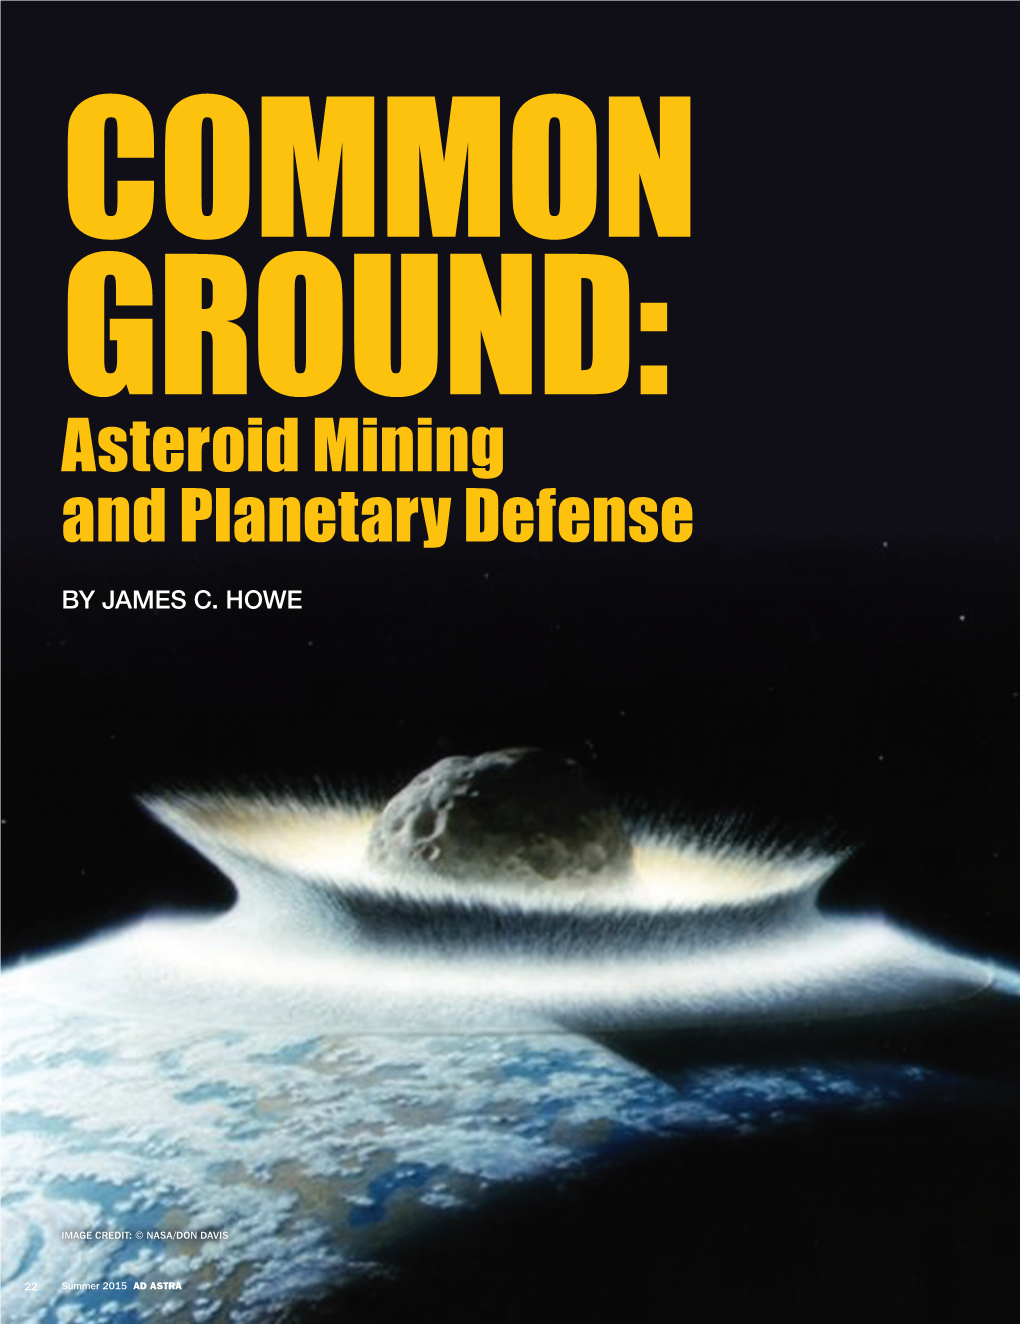 Asteroid Mining and Planetary Defense by JAMES C